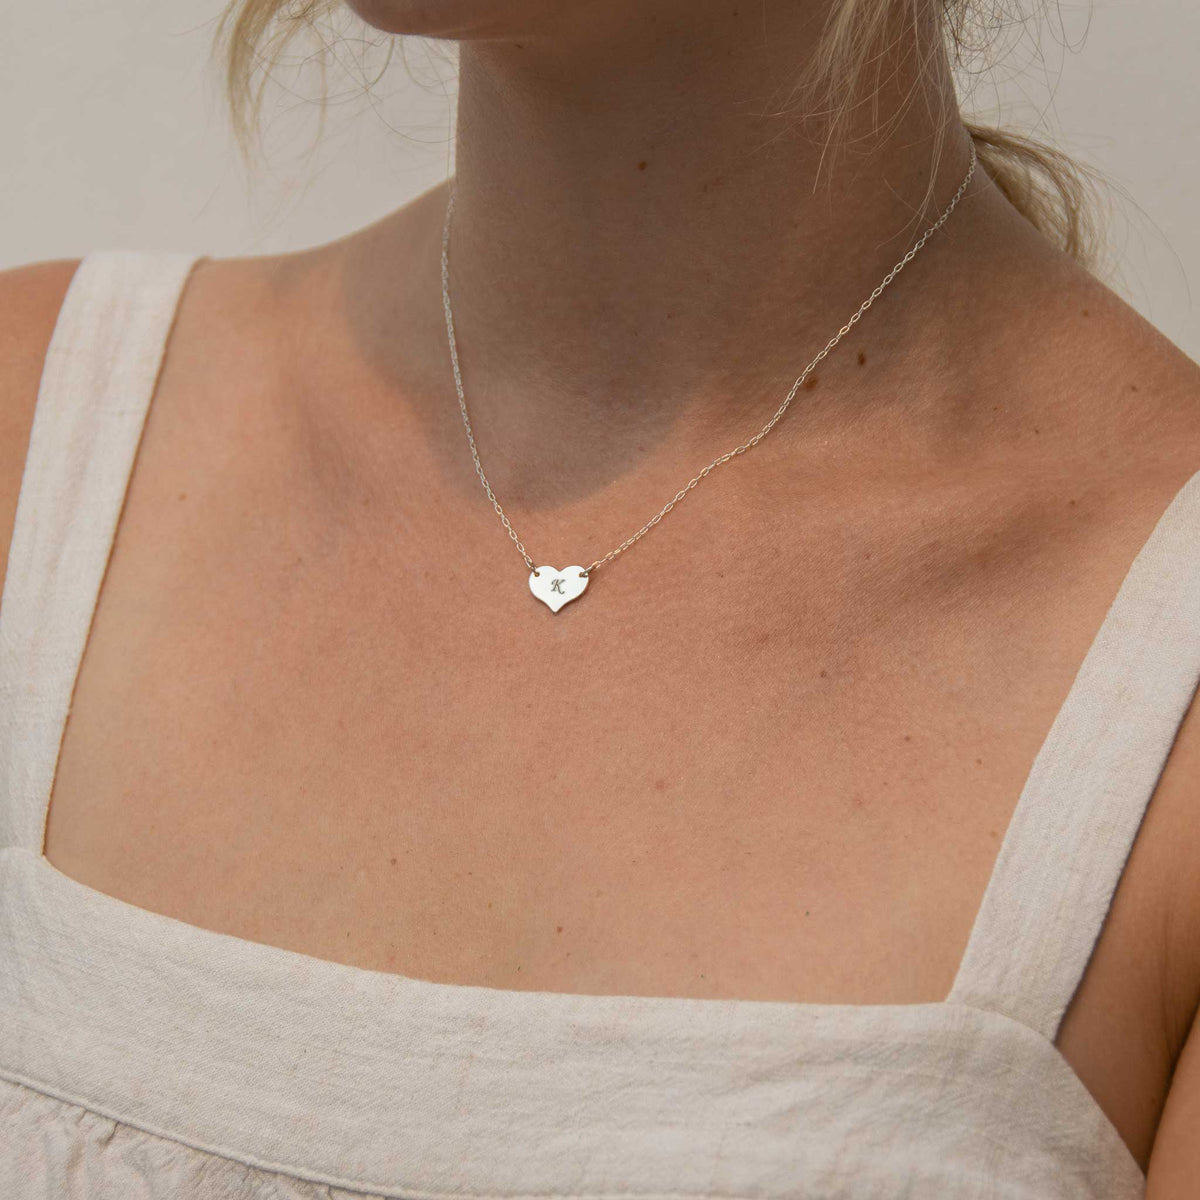 Woman wearing the heart pendant necklace with a white tank top on. 